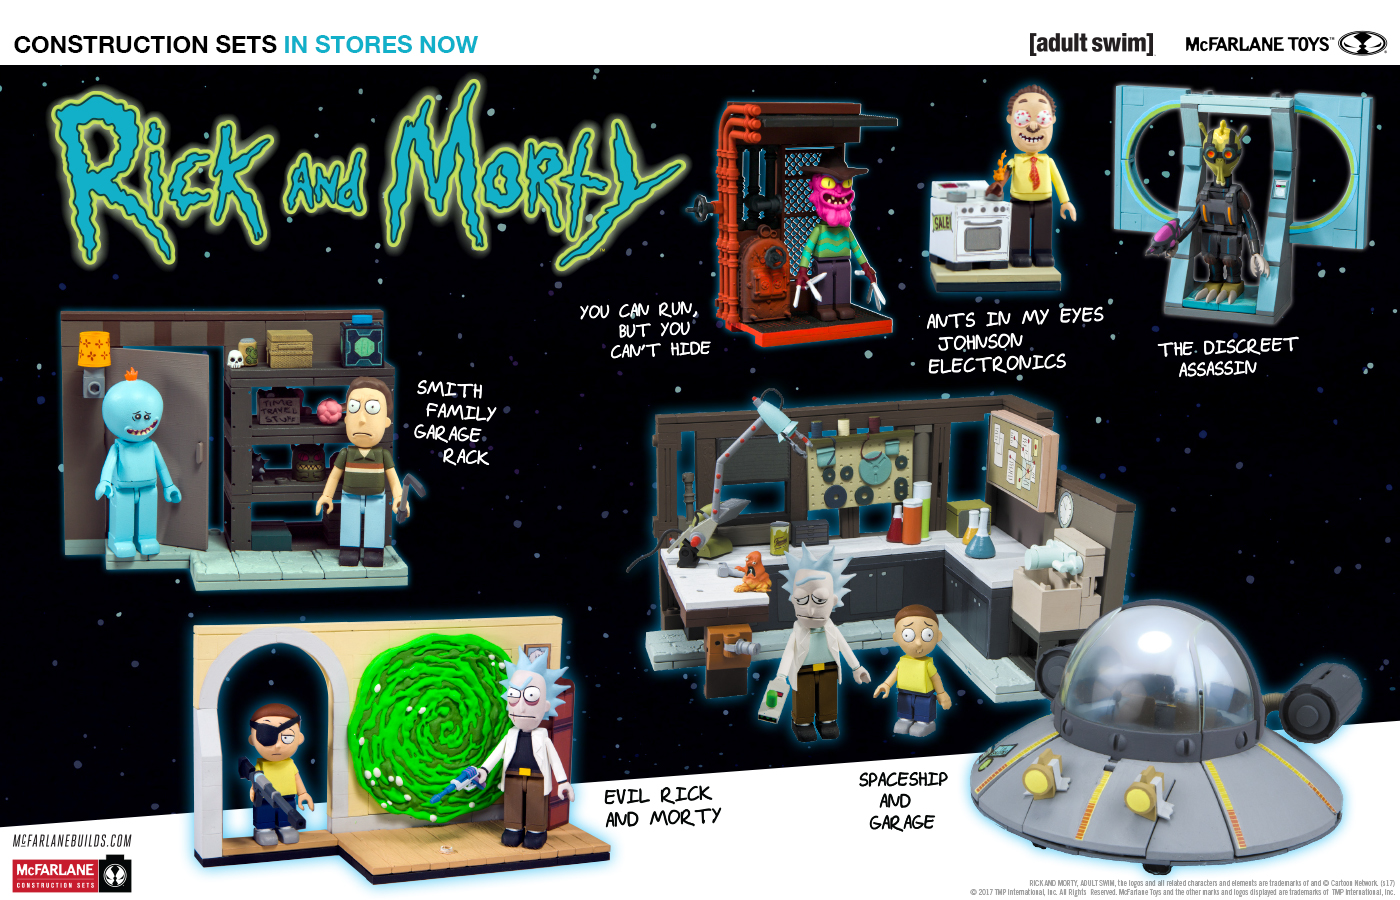 Rick and morty construction sets in stores now.